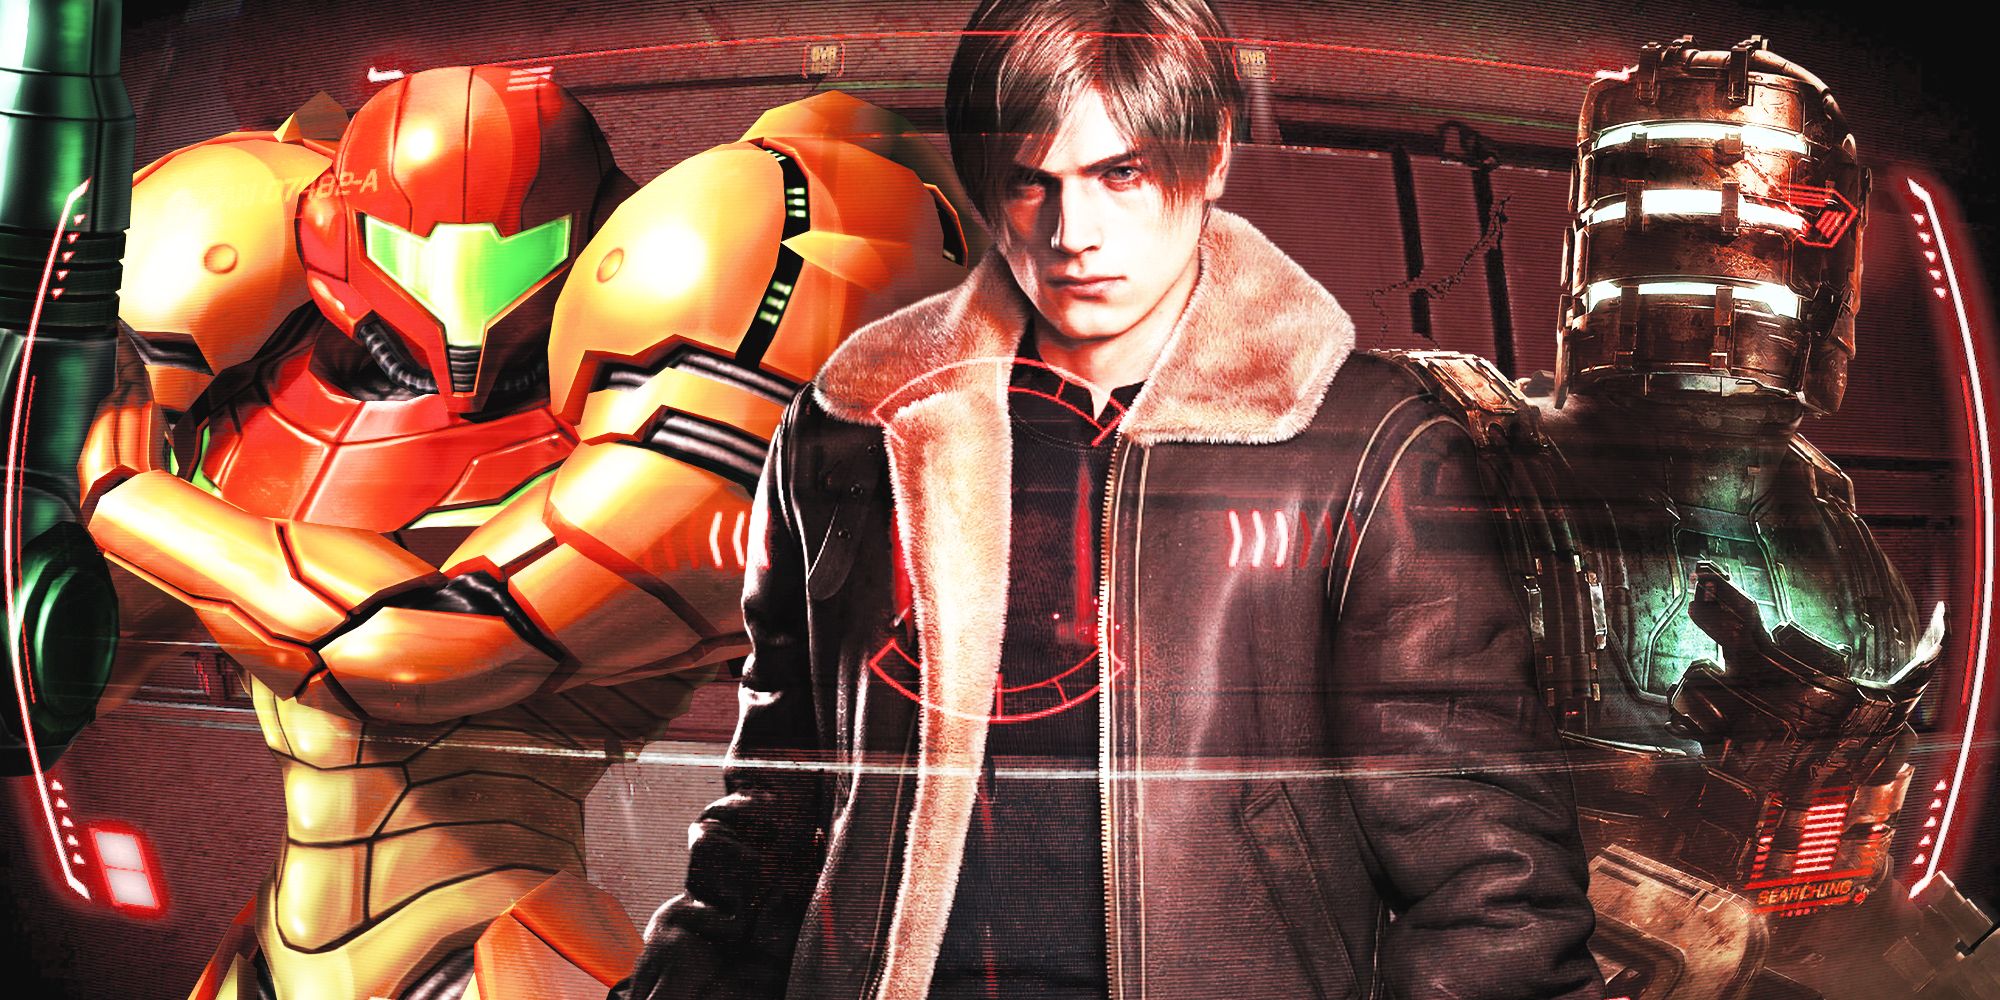 Some of 2023's remake protagonists, featuring Metroid Prime's Samus Aran, Resident Evil 4's Leon S. Kennedy. and Dead Space's Isaac Clarke